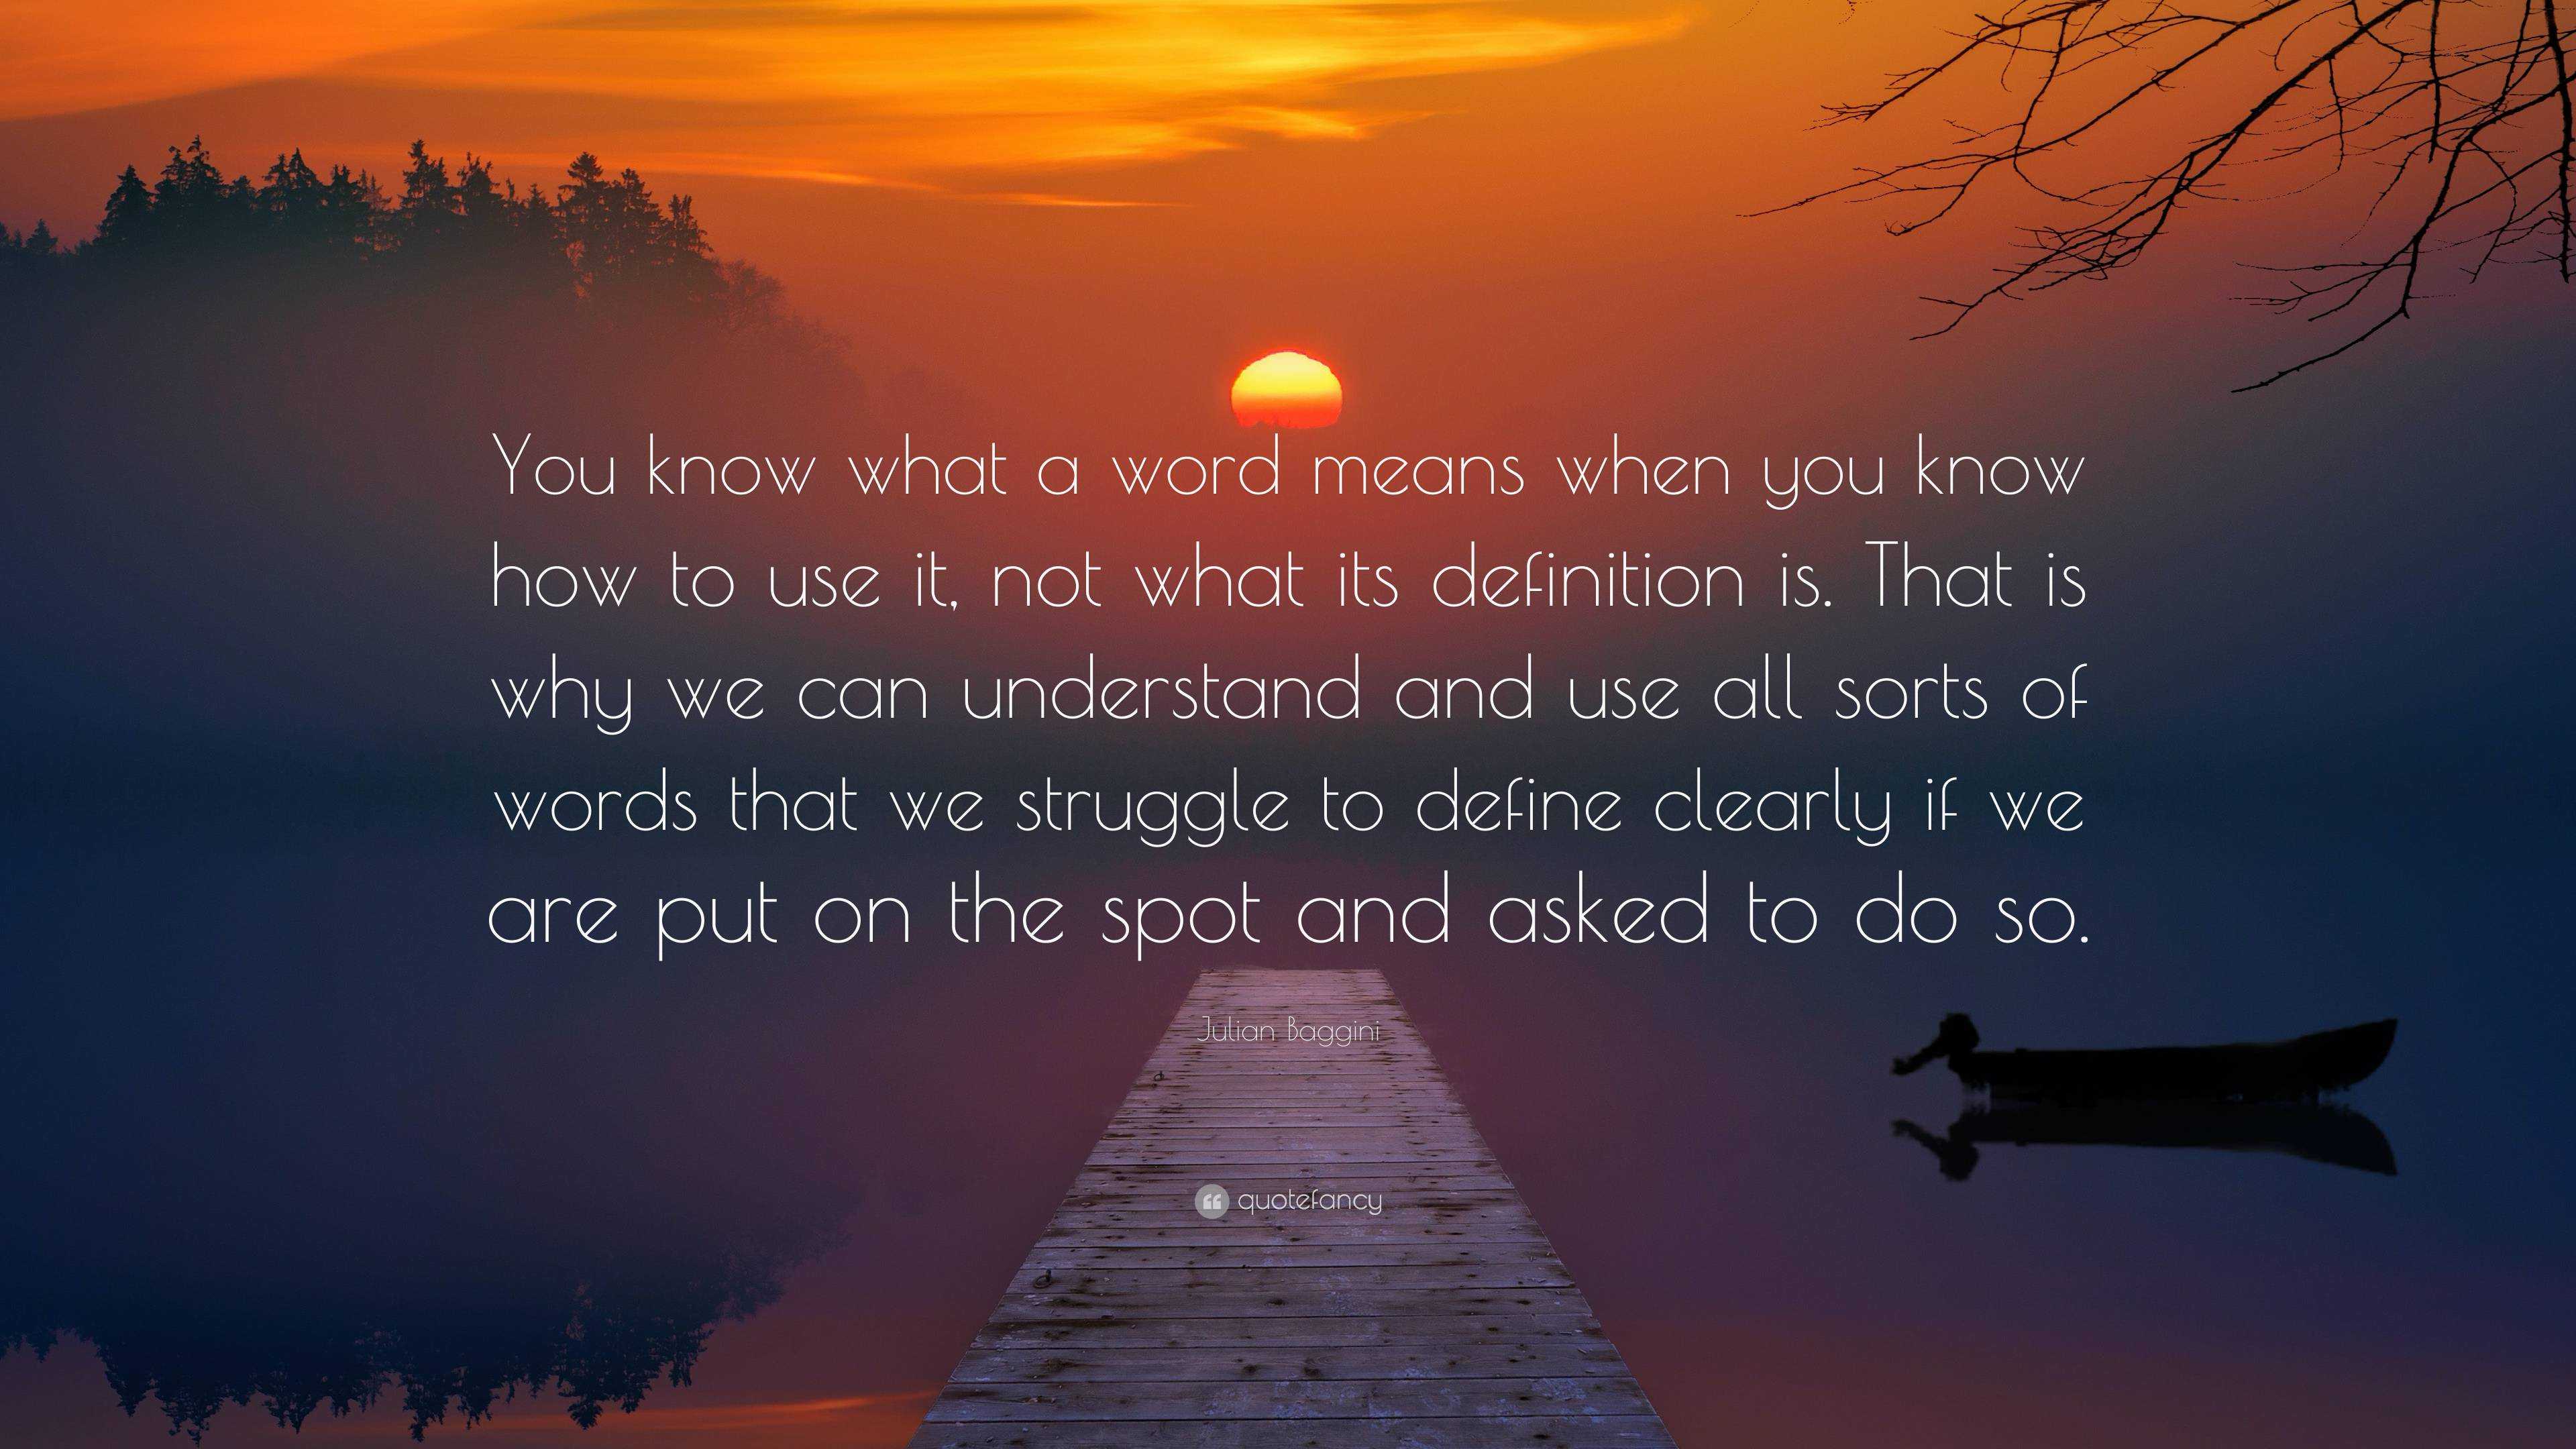 Julian Baggini Quote: “You know what a word means when you know how to ...